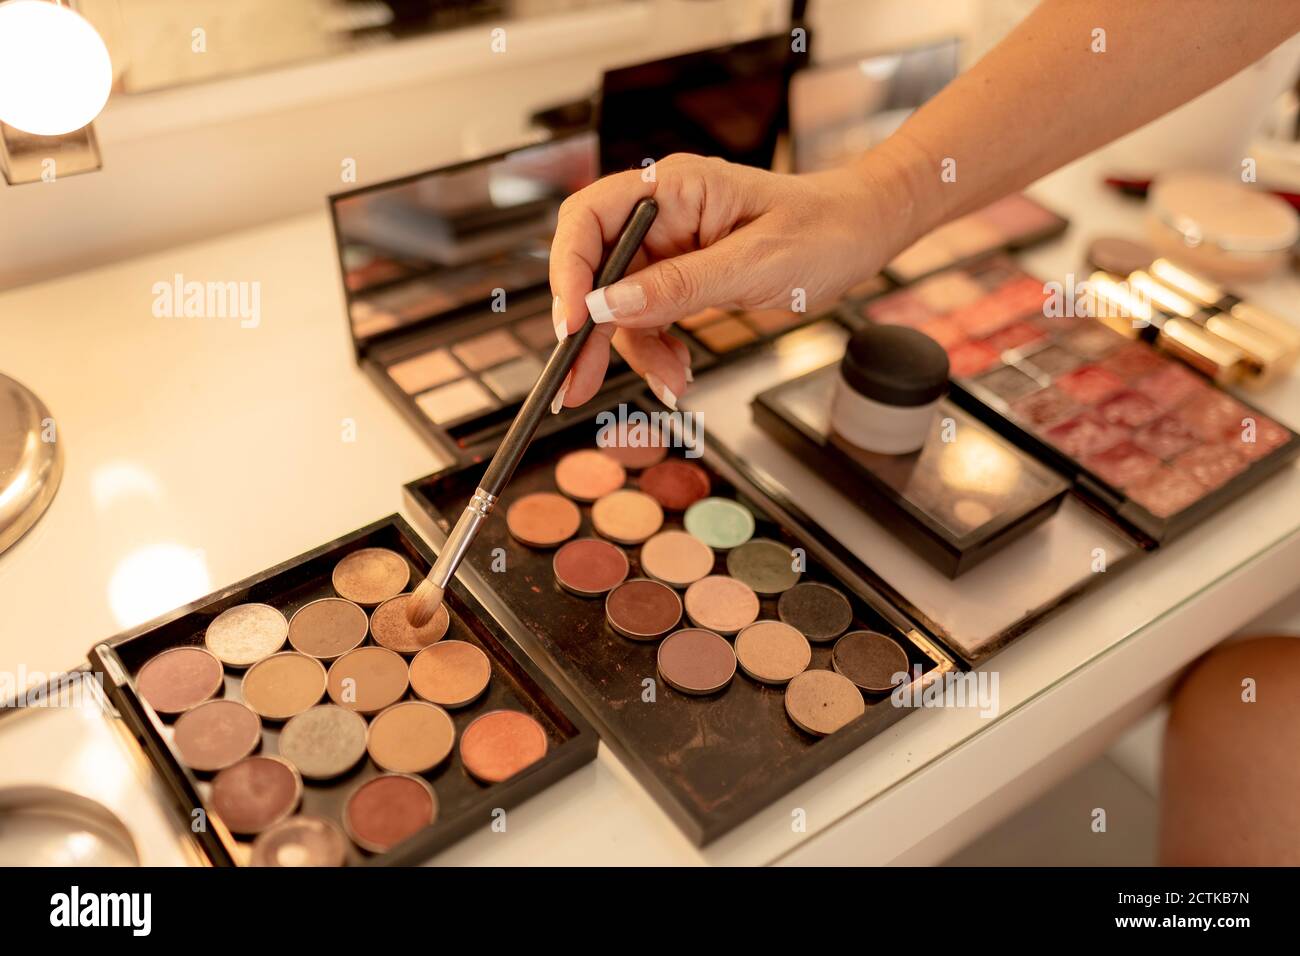 Close-up of beautician's hand with make-up brush and palettes on dressing table Stock Photo